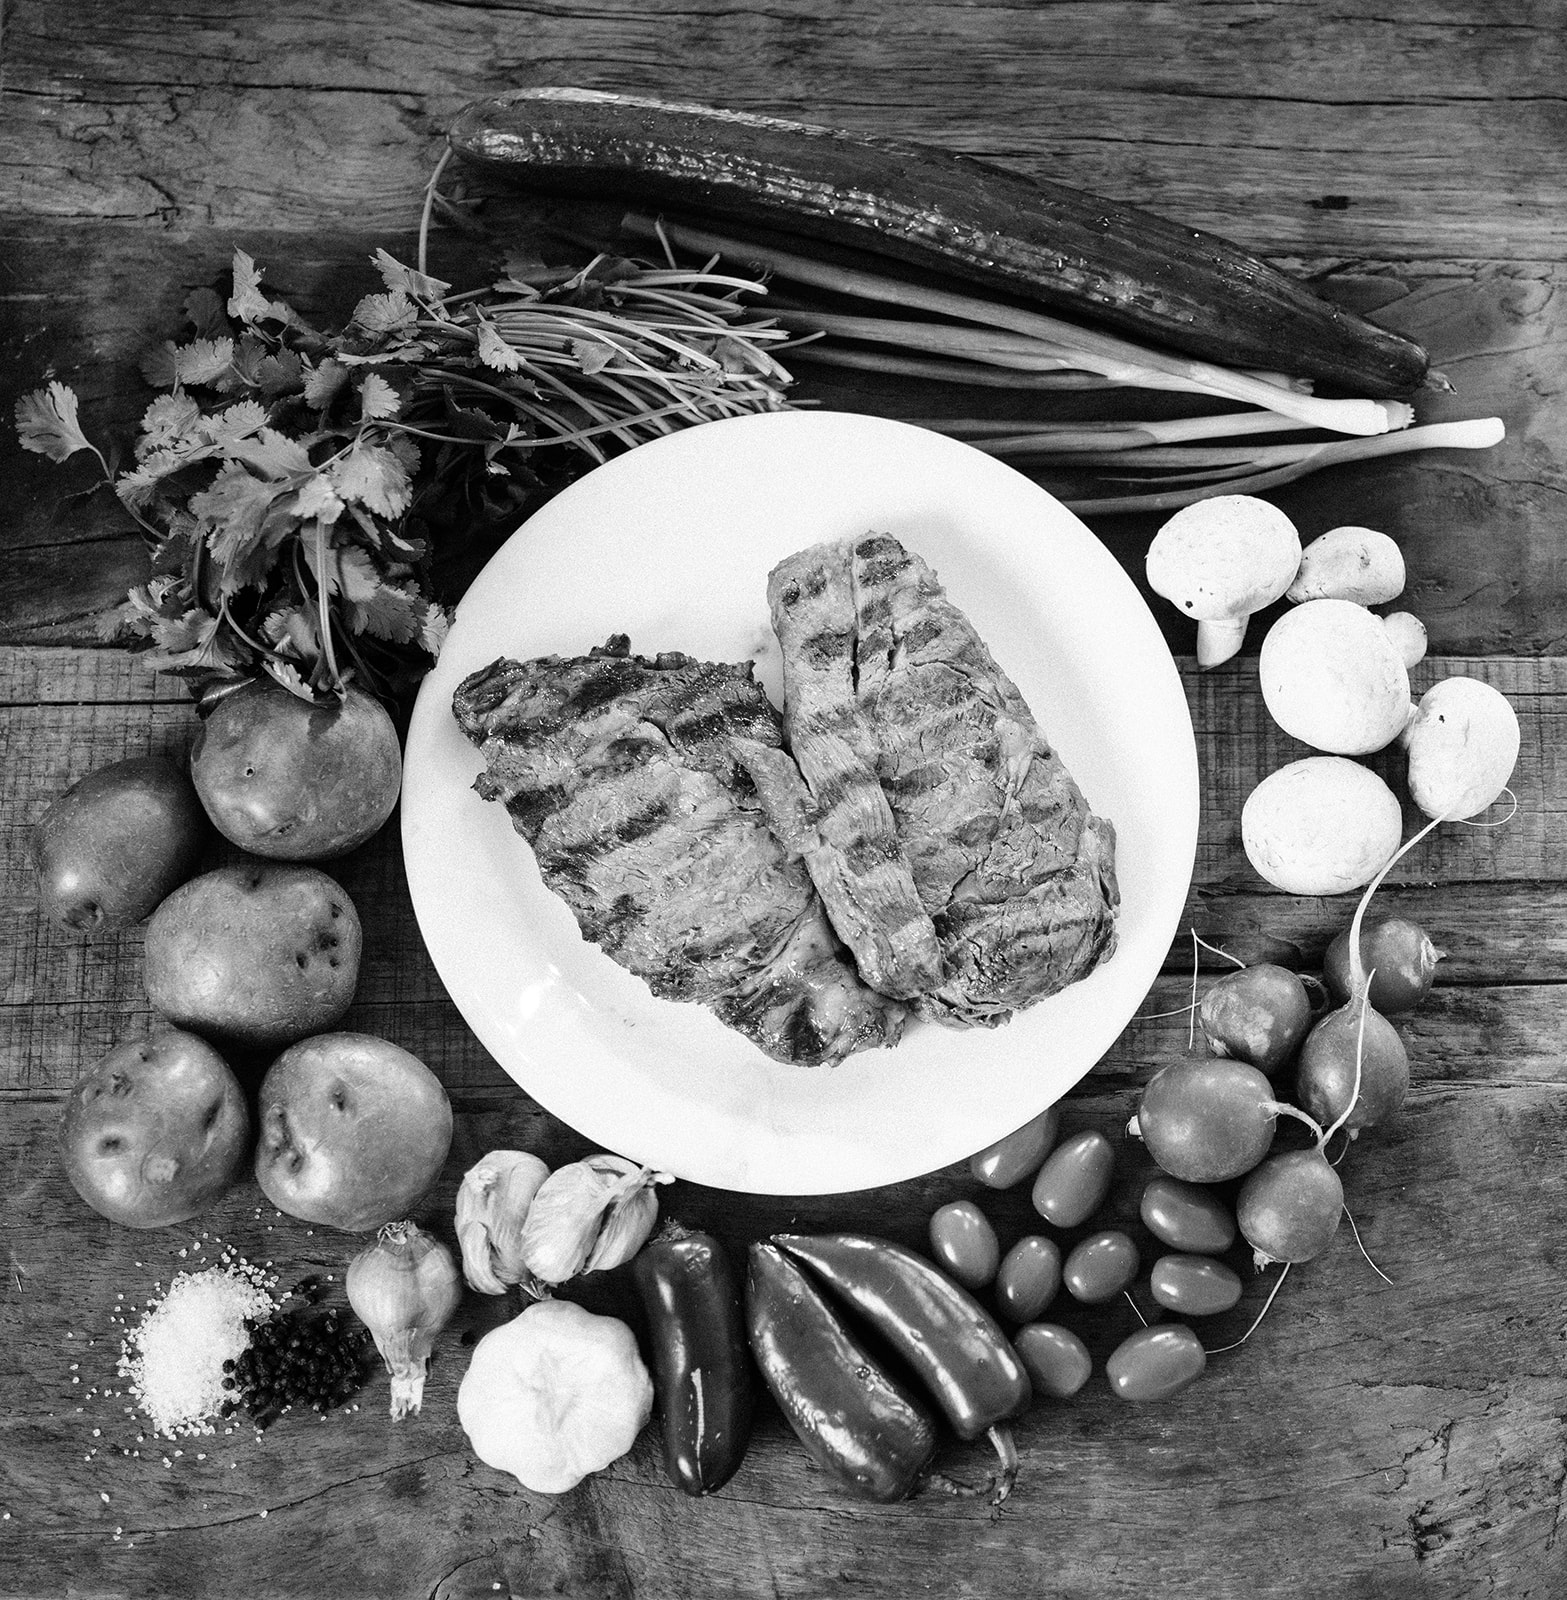 A black and white image of a boneless ribeye with grill marks, surrounded by garden vegetables.